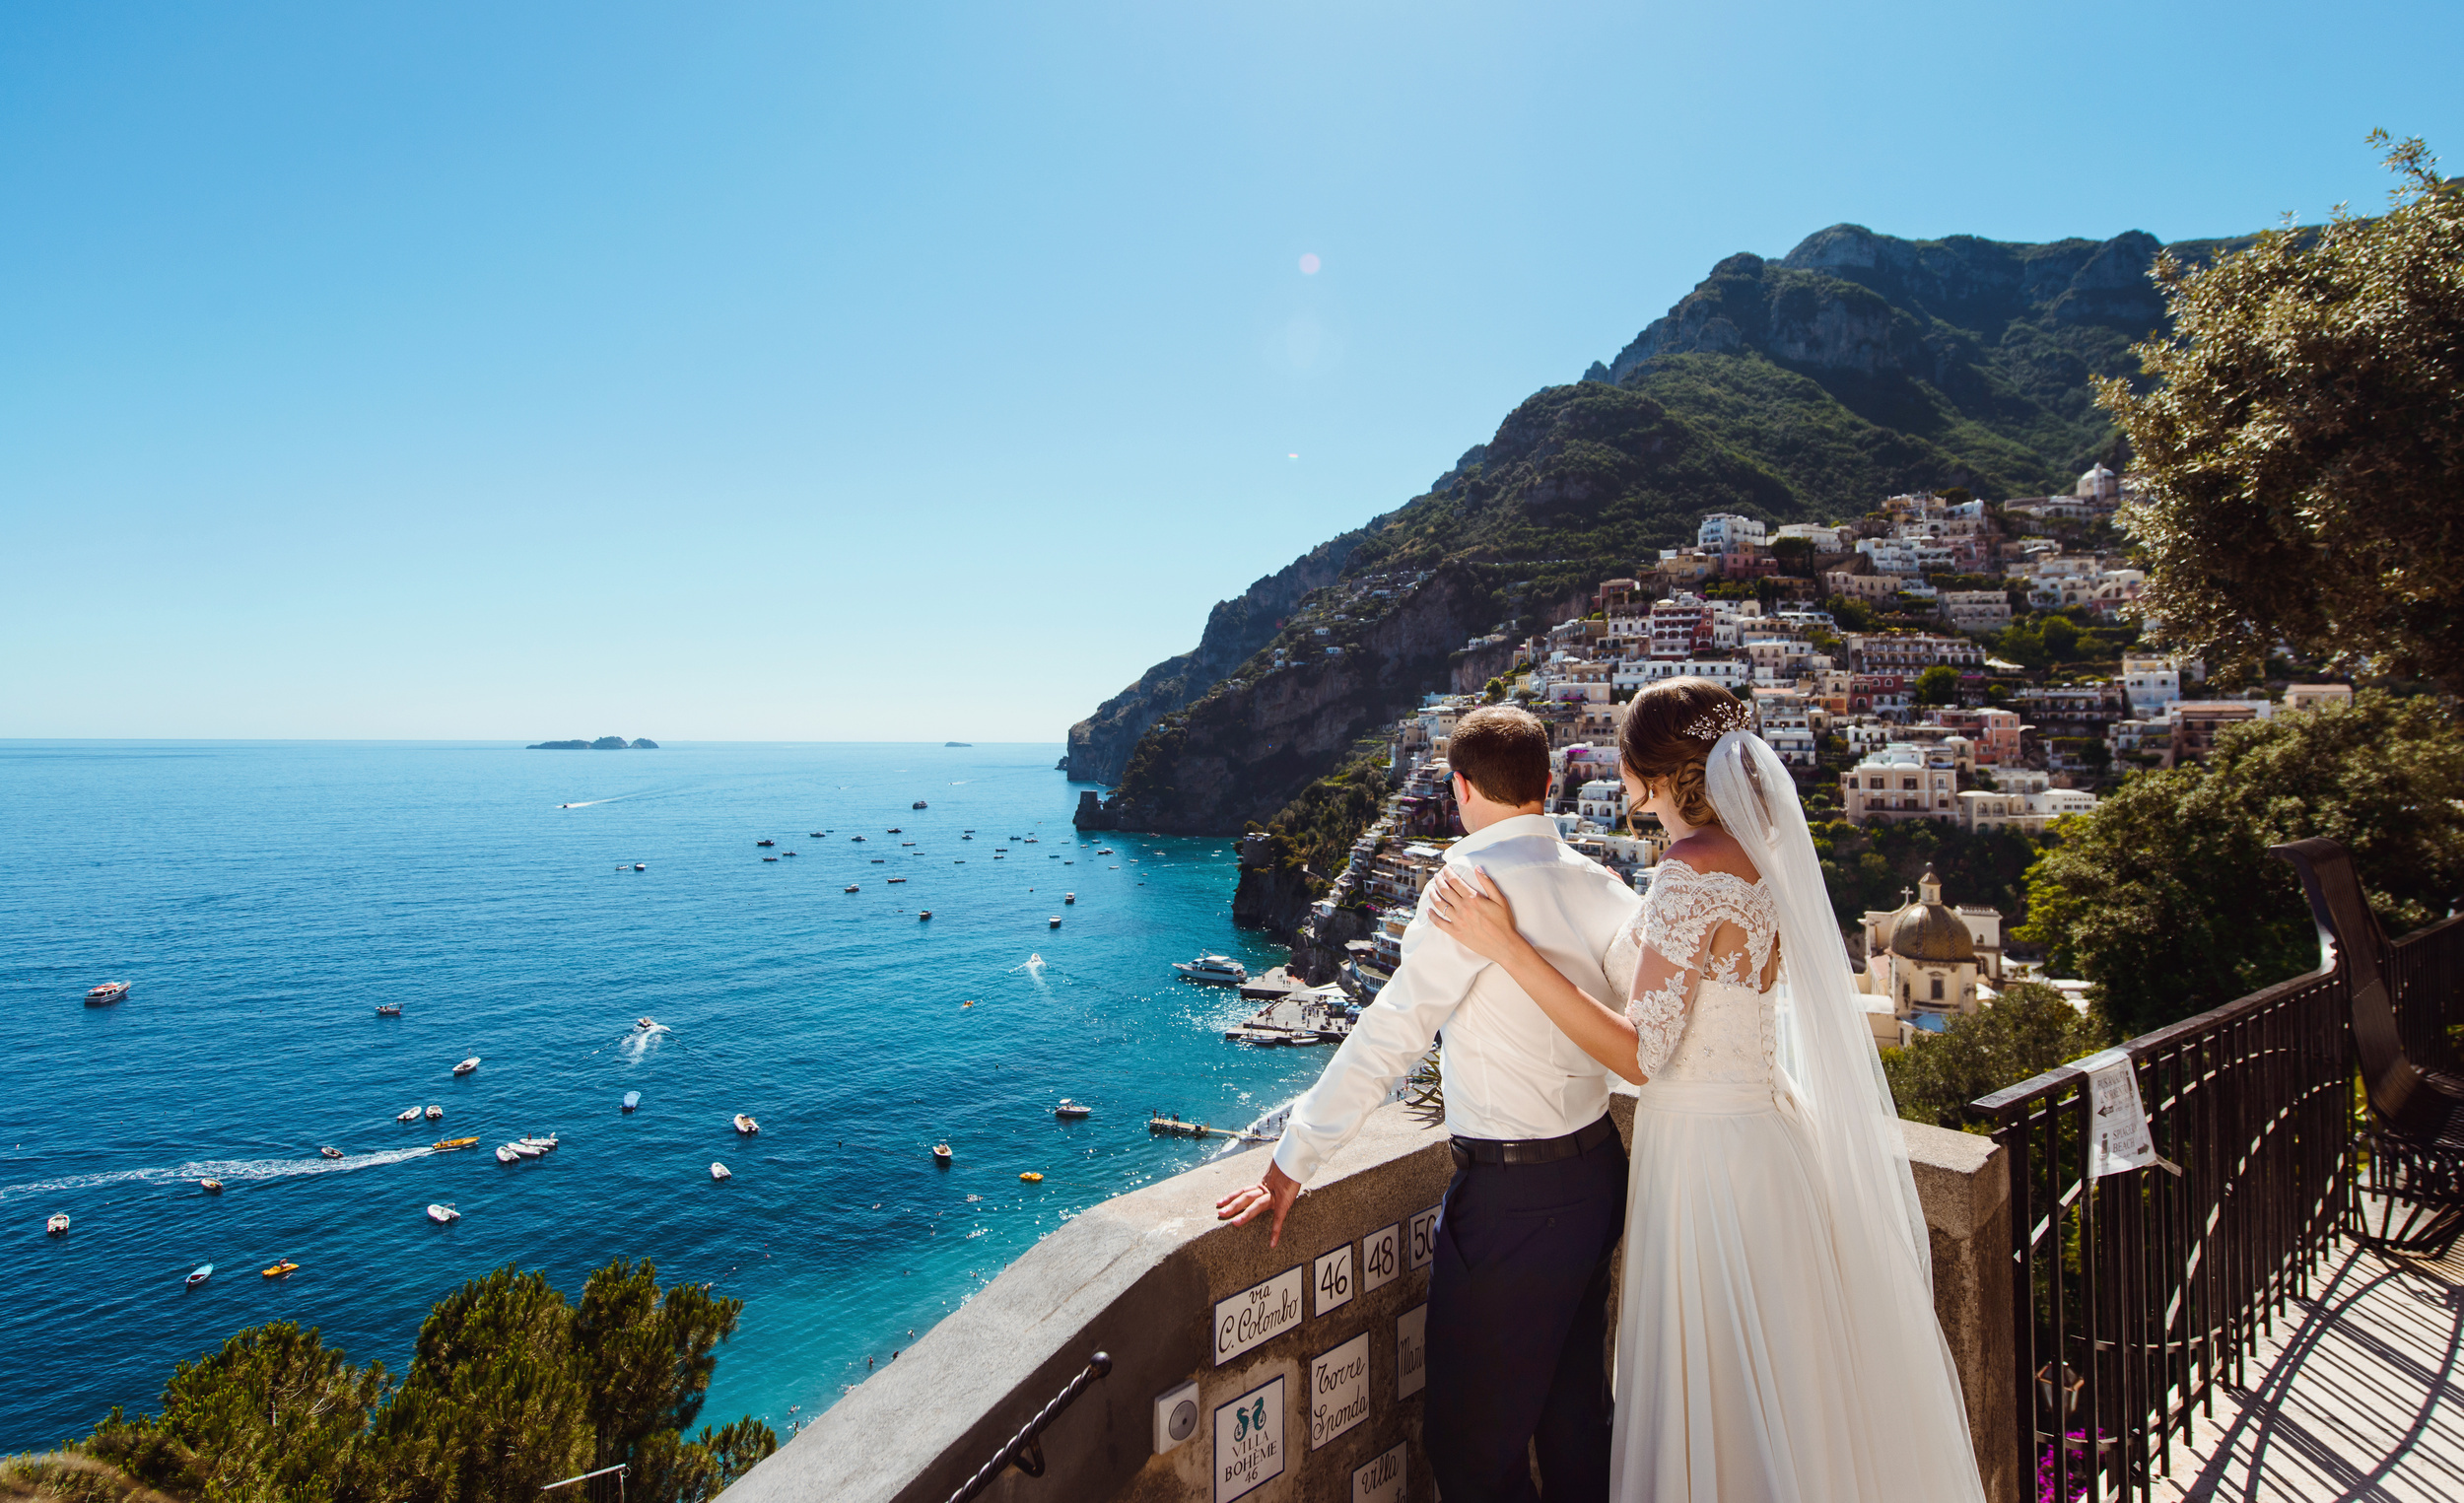 <p>Pastel-colored houses built into the hills, lemon trees everywhere, and the Mediterranean in your footsteps. It’s no wonder couples have been flocking to the Amalfi Coast for decades.</p><p>You may also like: <a href='https://www.yardbarker.com/lifestyle/articles/13_cereals_we_loved_as_kids_and_13_we_absolutely_hated_012324/s1__38074599'>13 cereals we loved as kids and 13 we absolutely hated</a></p>